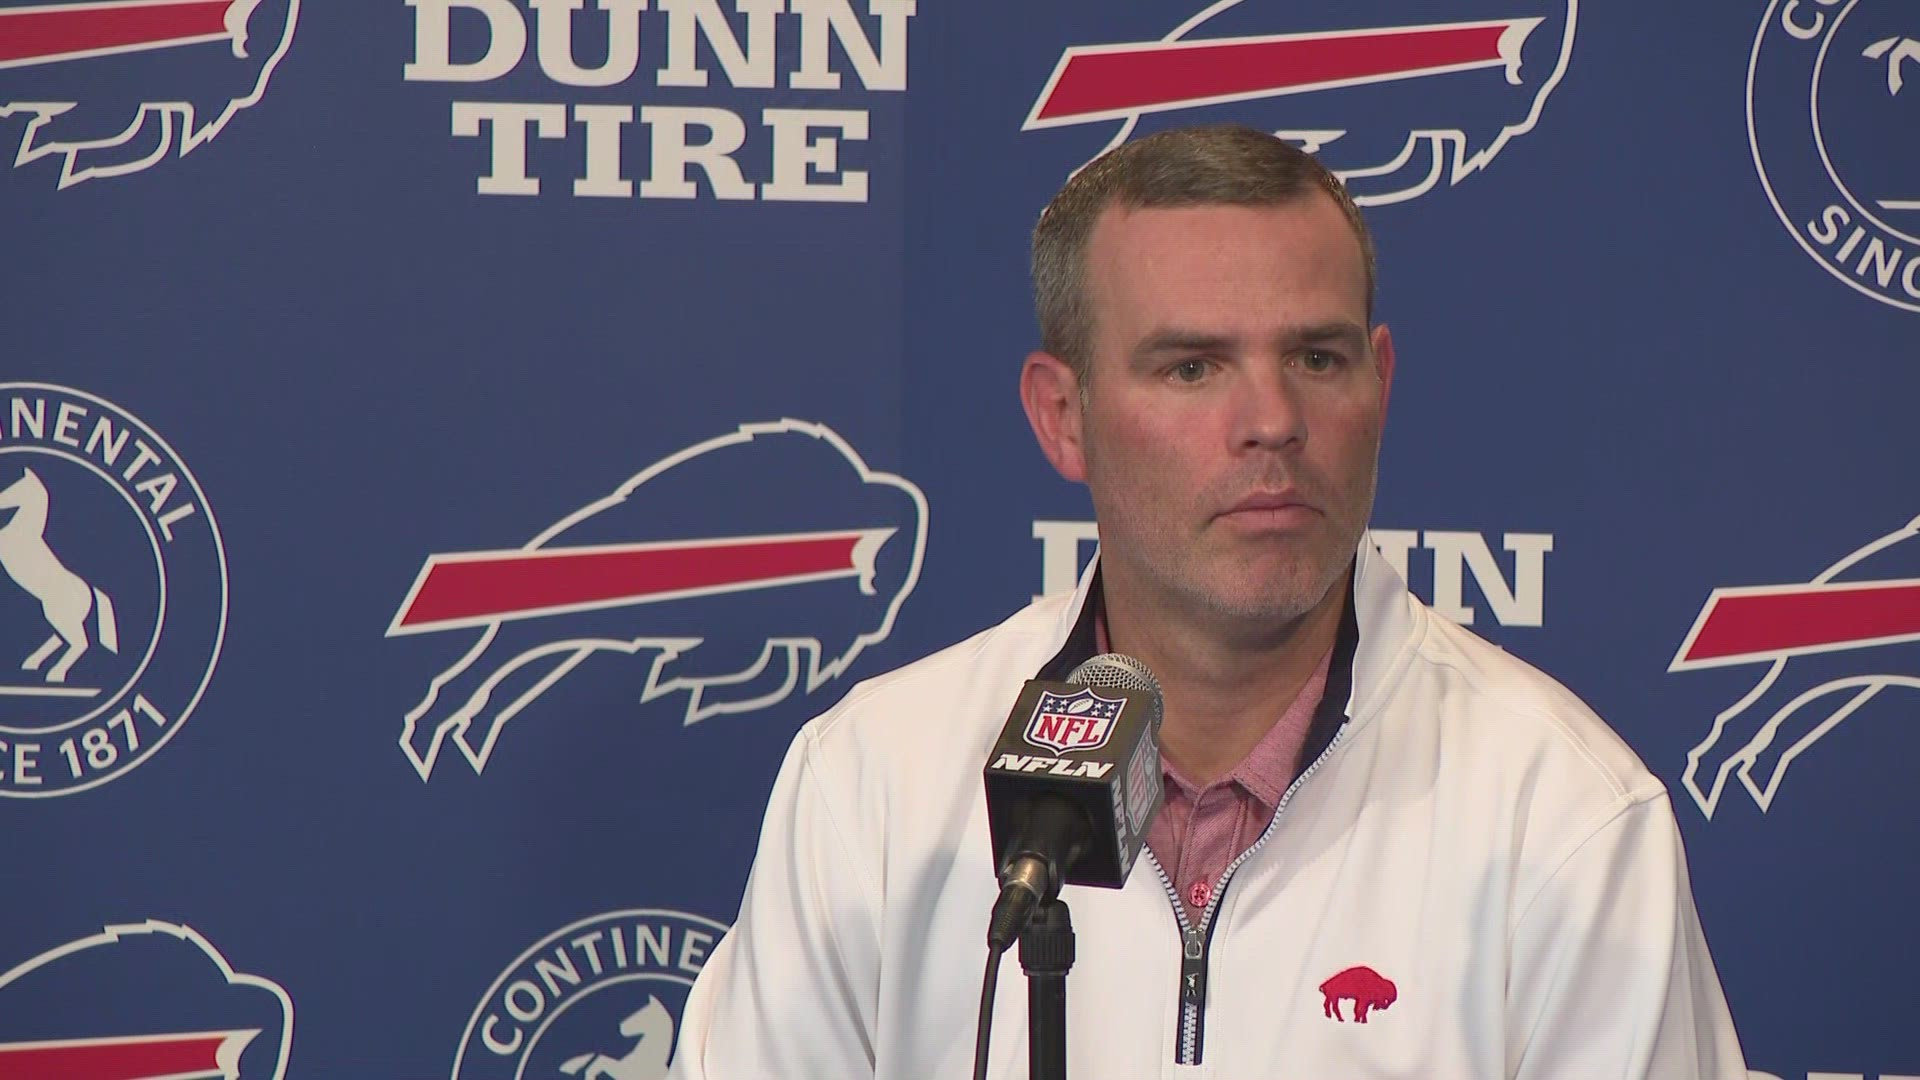 Bills GM Brandon Beane discussed the team's start to free agency during a news conference on Thursday, March 16 in Orchard Park.